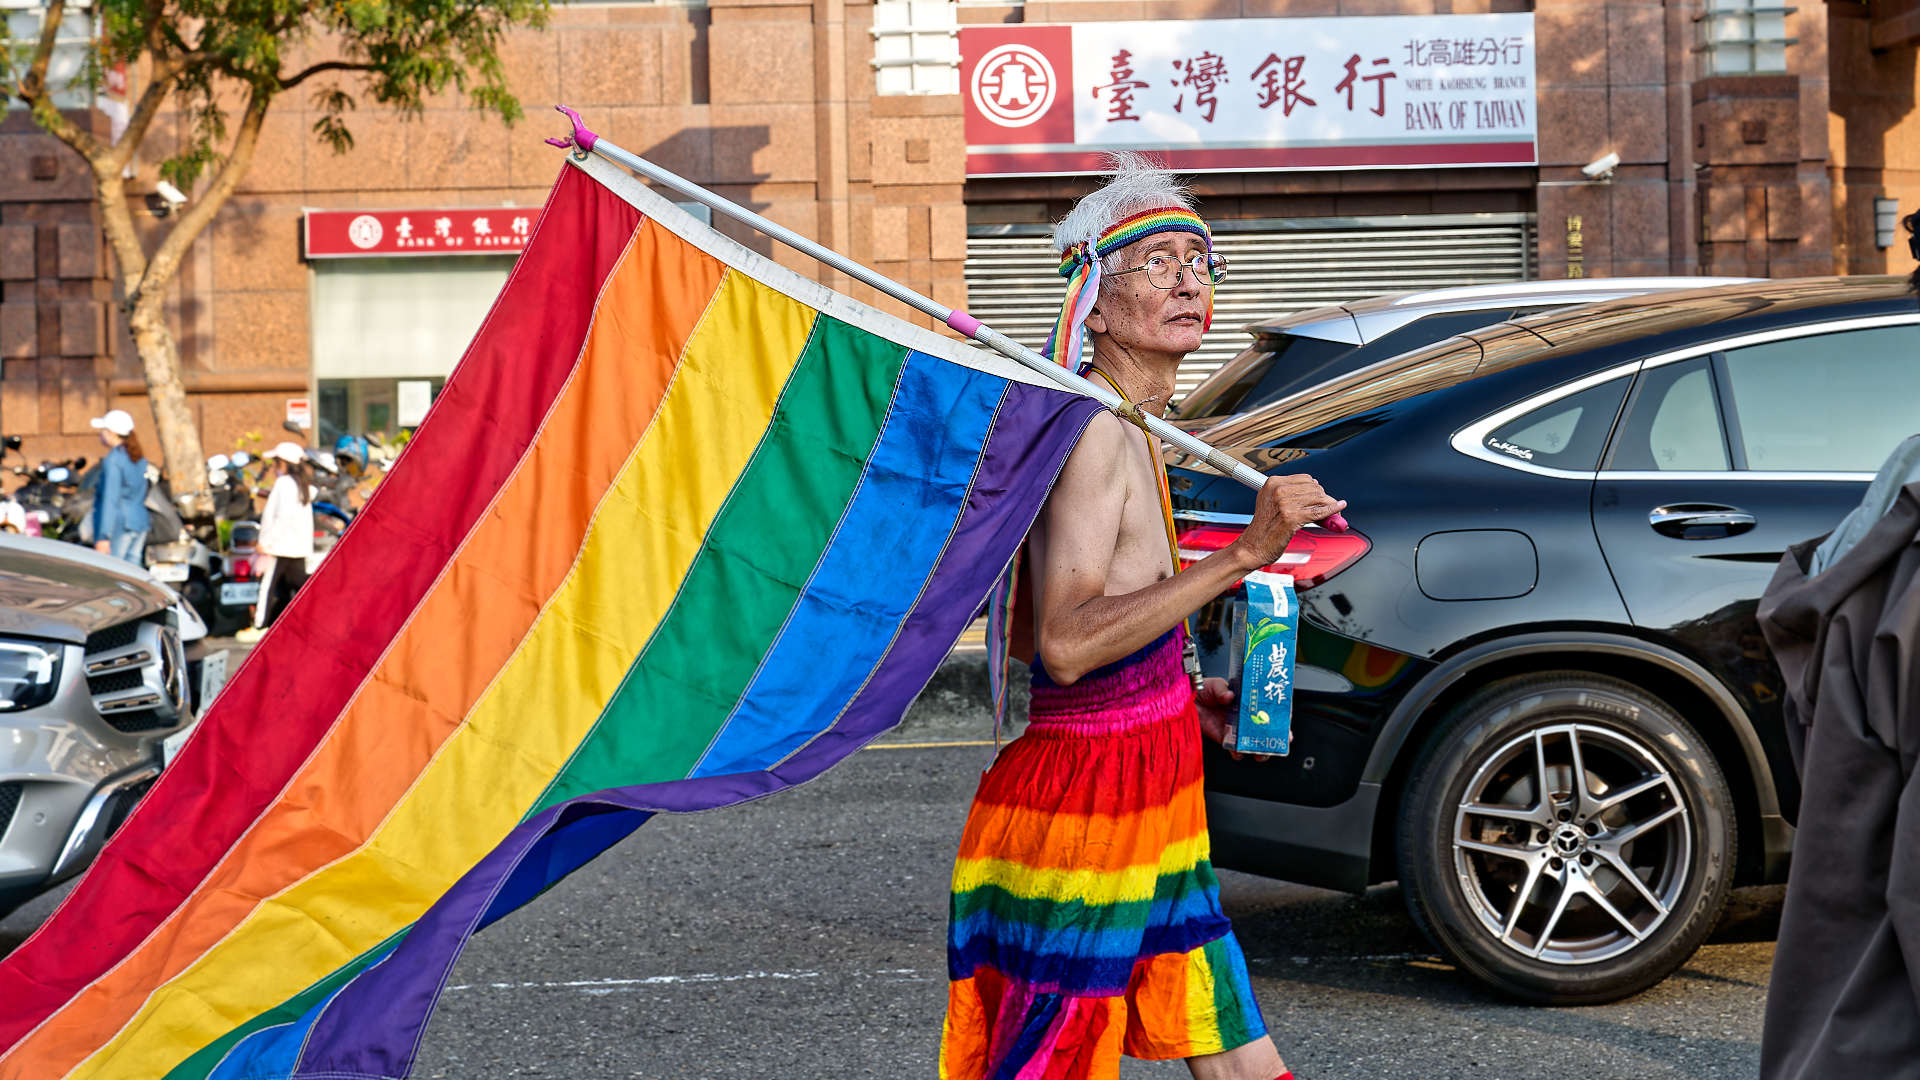 Shirtless elderly man, wearing rainbow-colored pants and carrying a large rainbow flag.